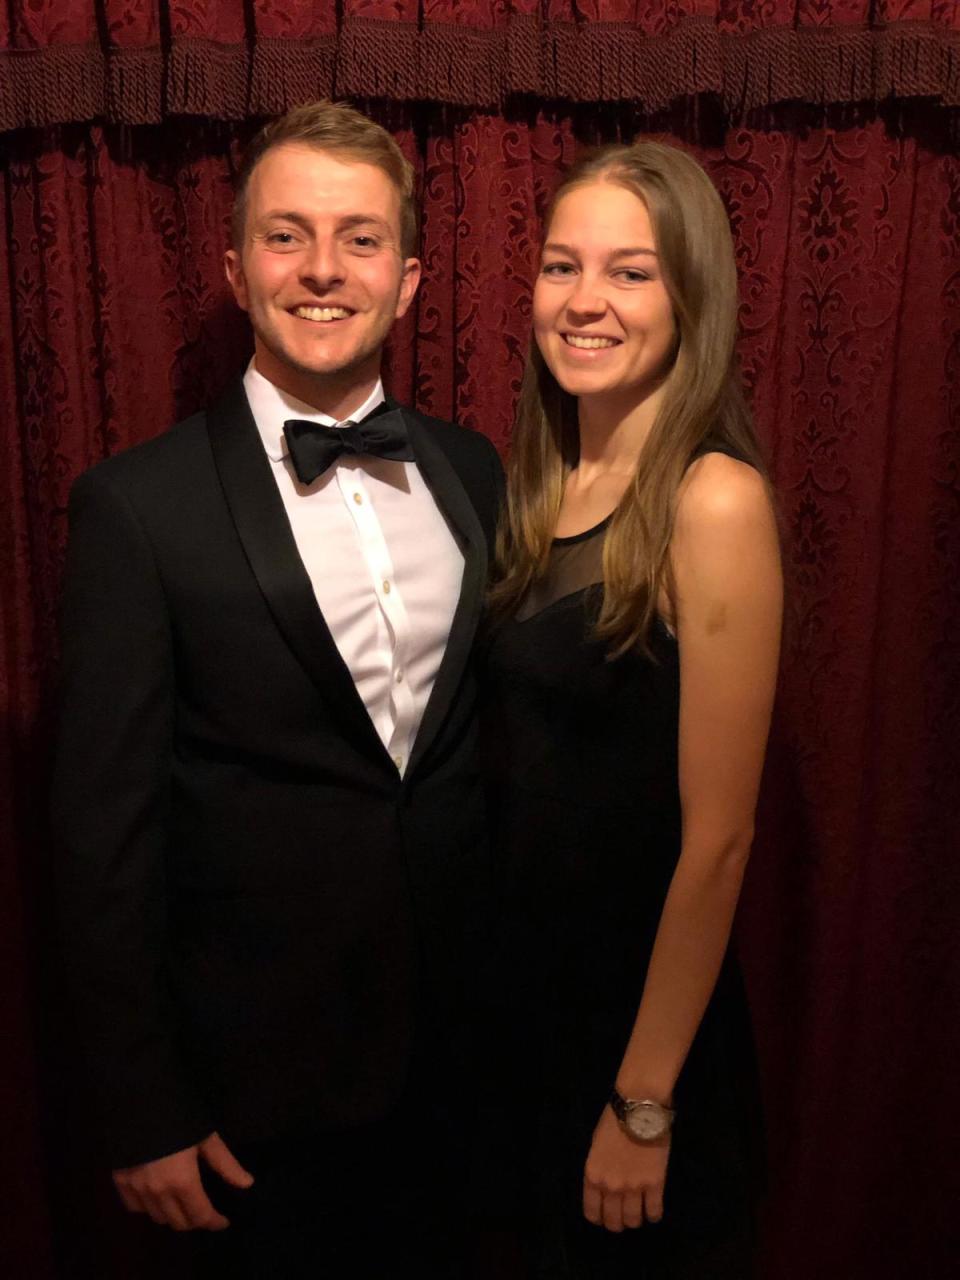 Emma Bond with pictured with her fiance, Edd Blake, in 2019.